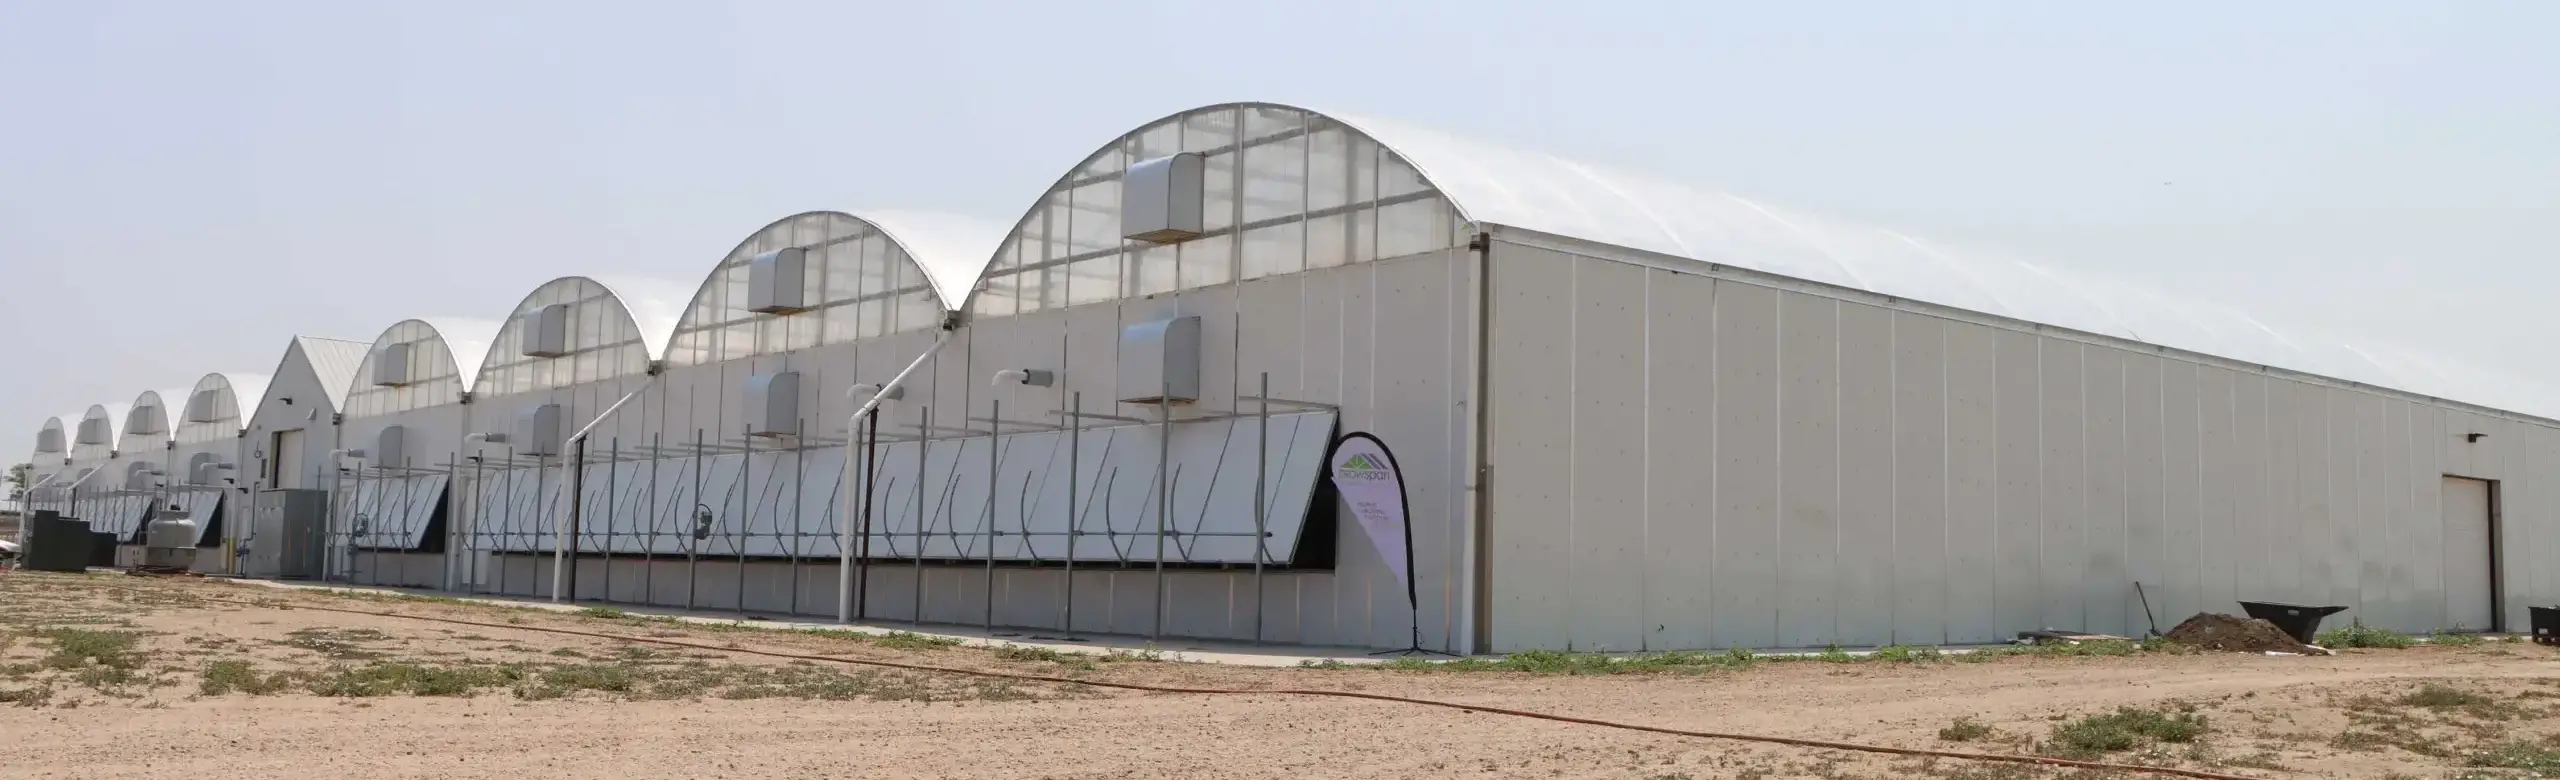 Exterior of a multi-bay hybrid greenhouse